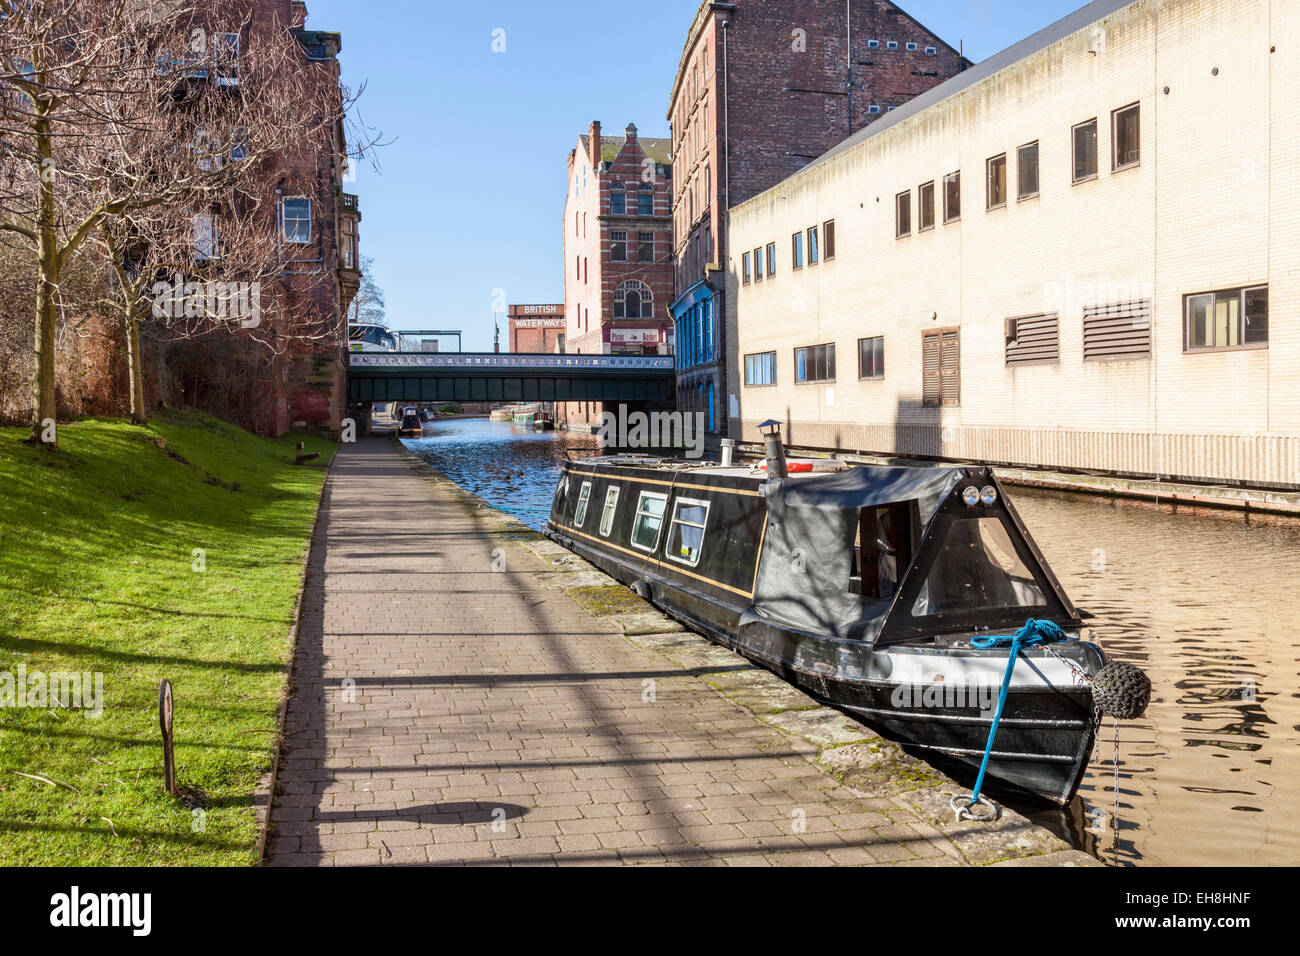 Moored narrow boat on a city canal, Nottingham and Beeston Canal, Nottingham, England, UK Stock Photo